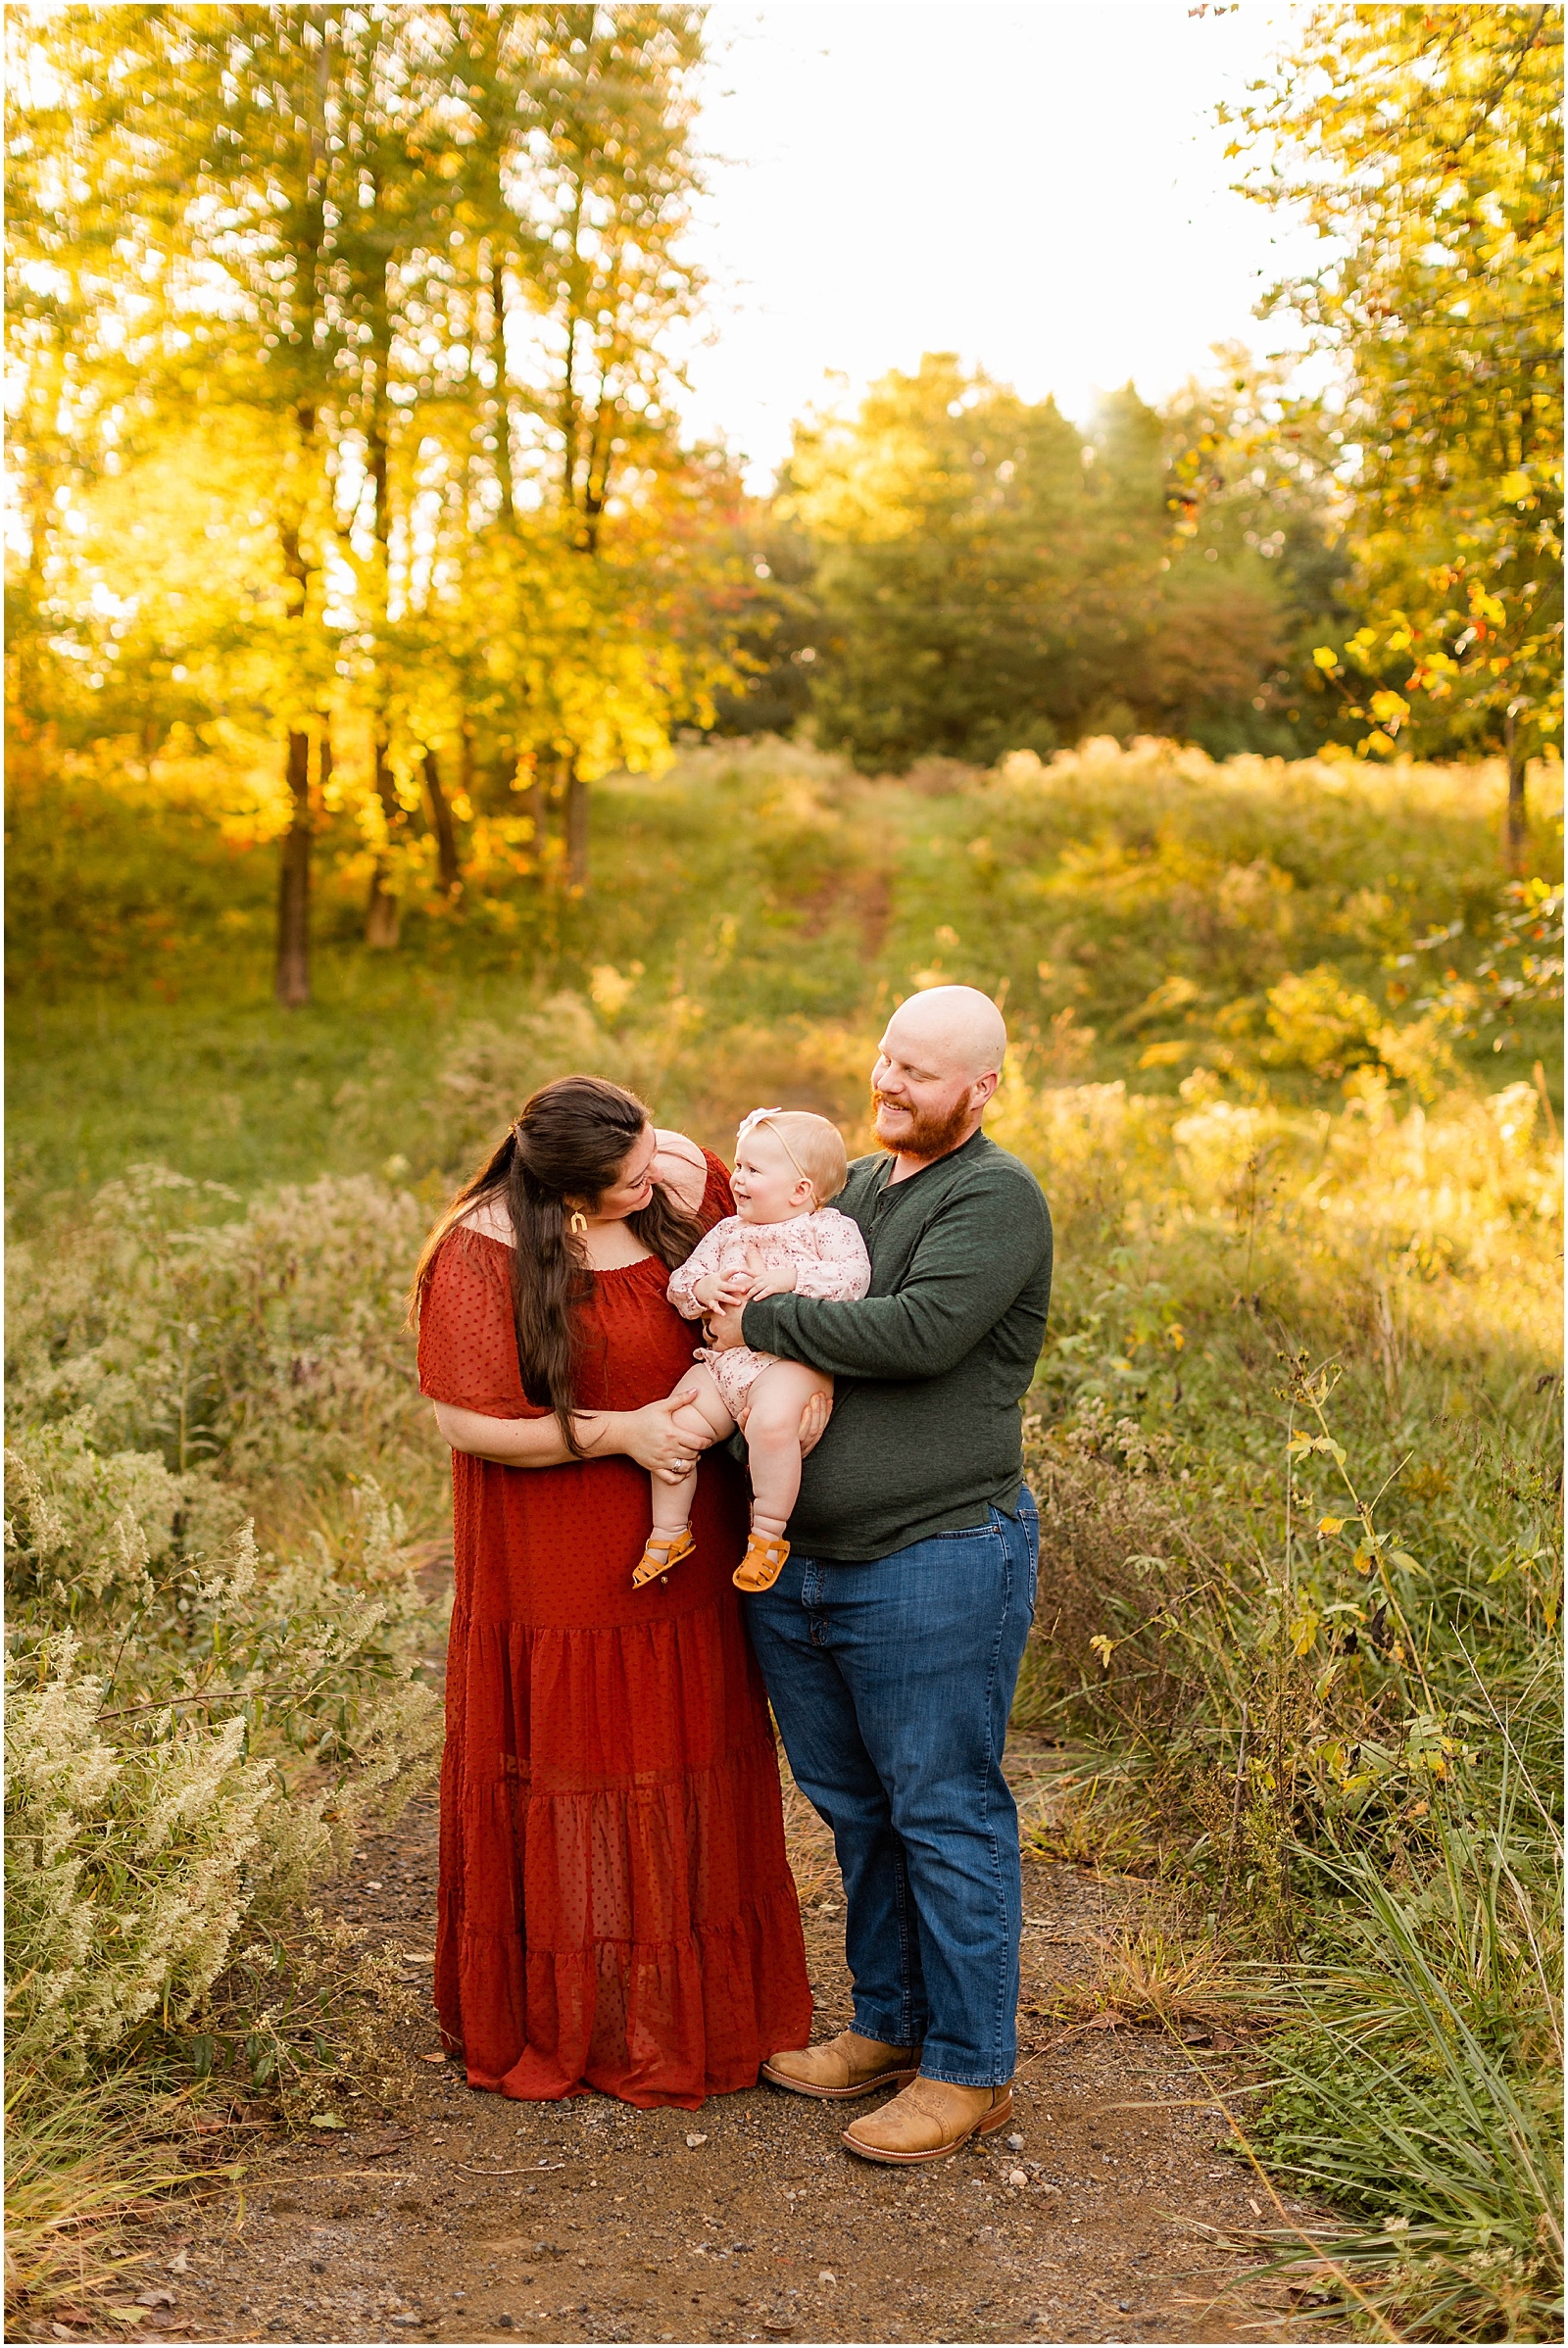 The Peck's Fall Family Session Bret and Brandie Photography | Evansville Indiana Wedding Photographers_0002.jpg